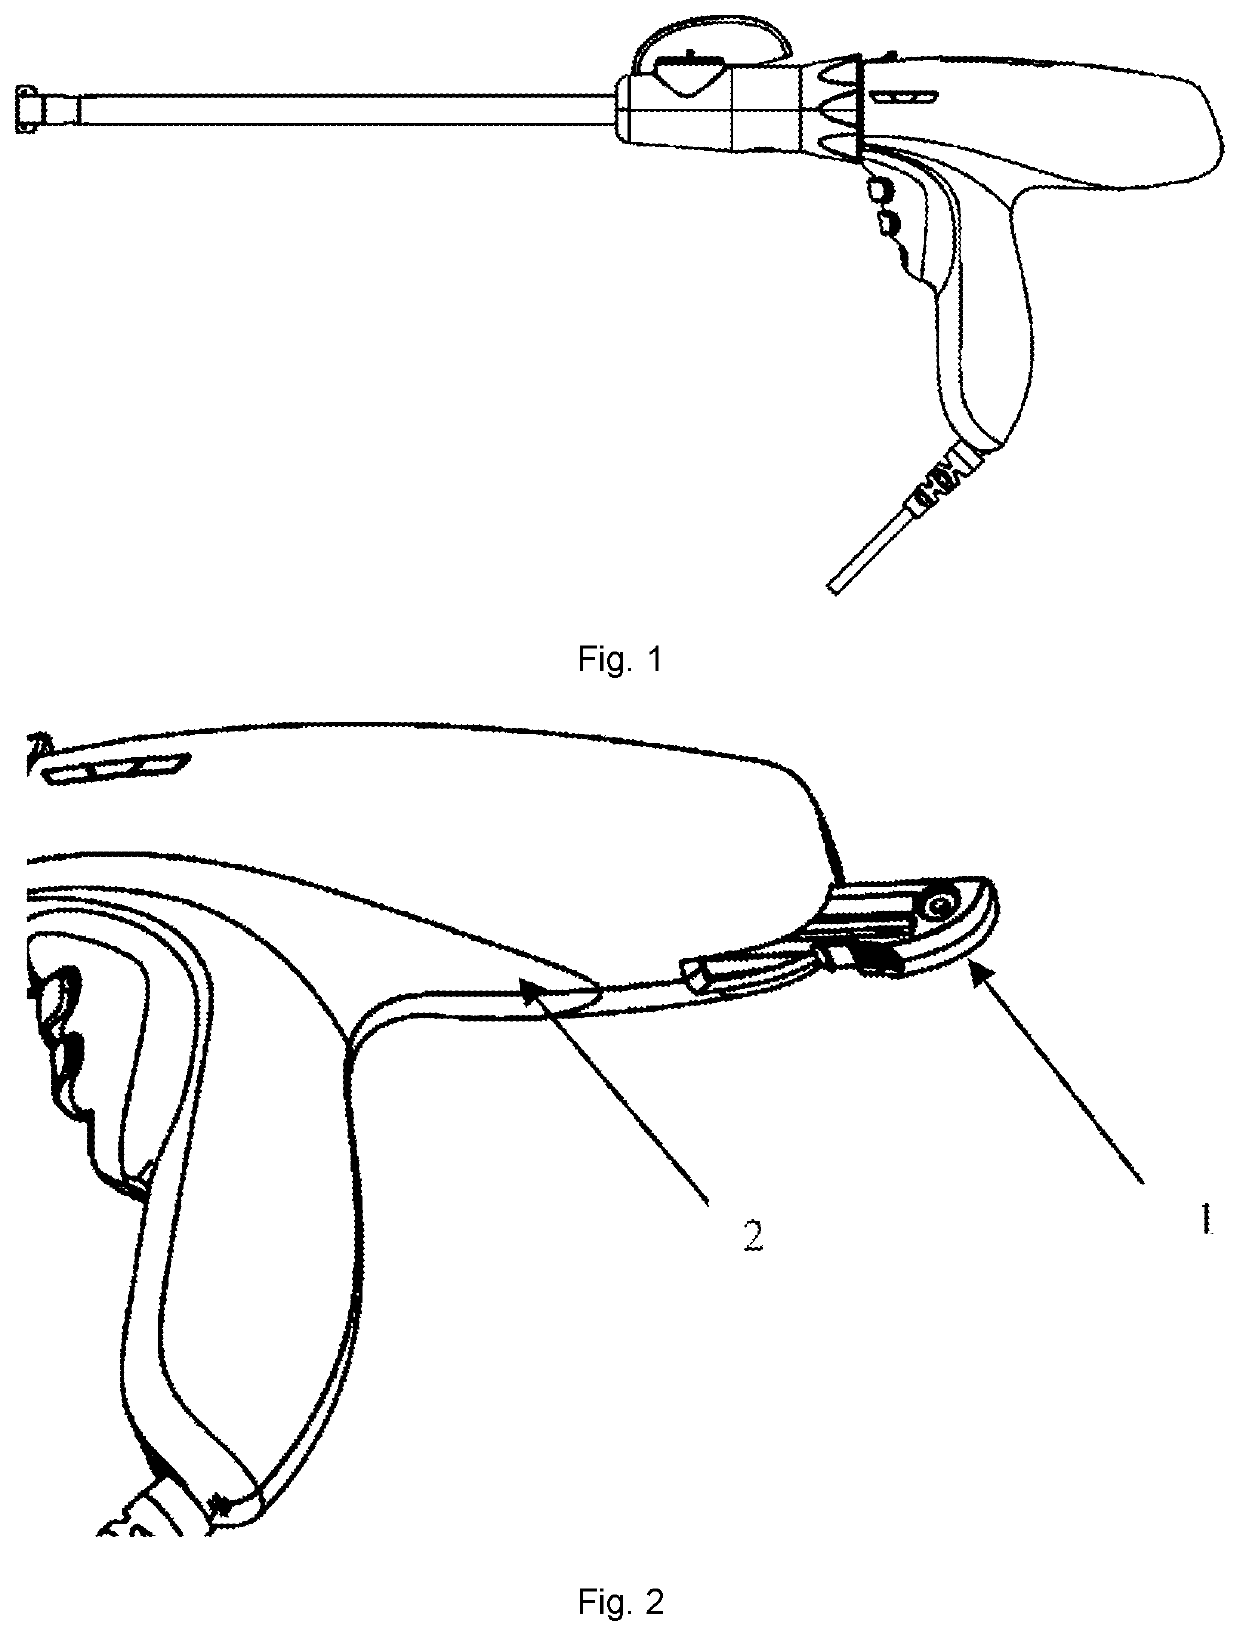 Reset mechanism, stapler, and medical device